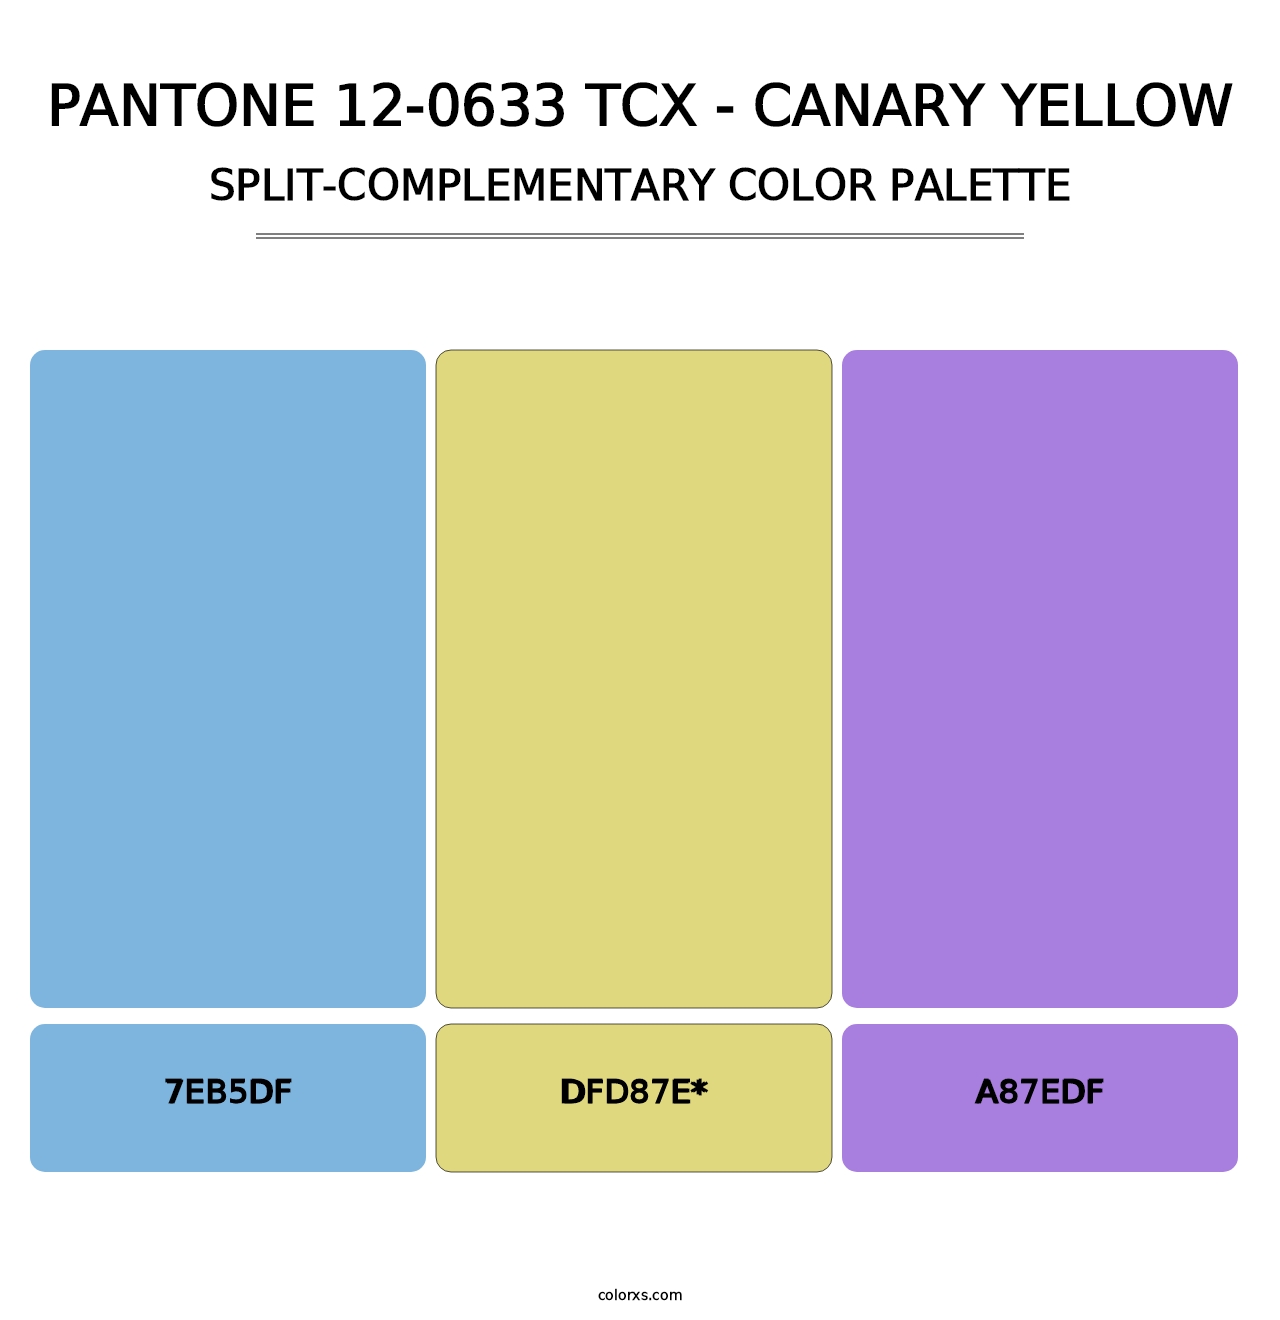 PANTONE 12-0633 TCX - Canary Yellow - Split-Complementary Color Palette